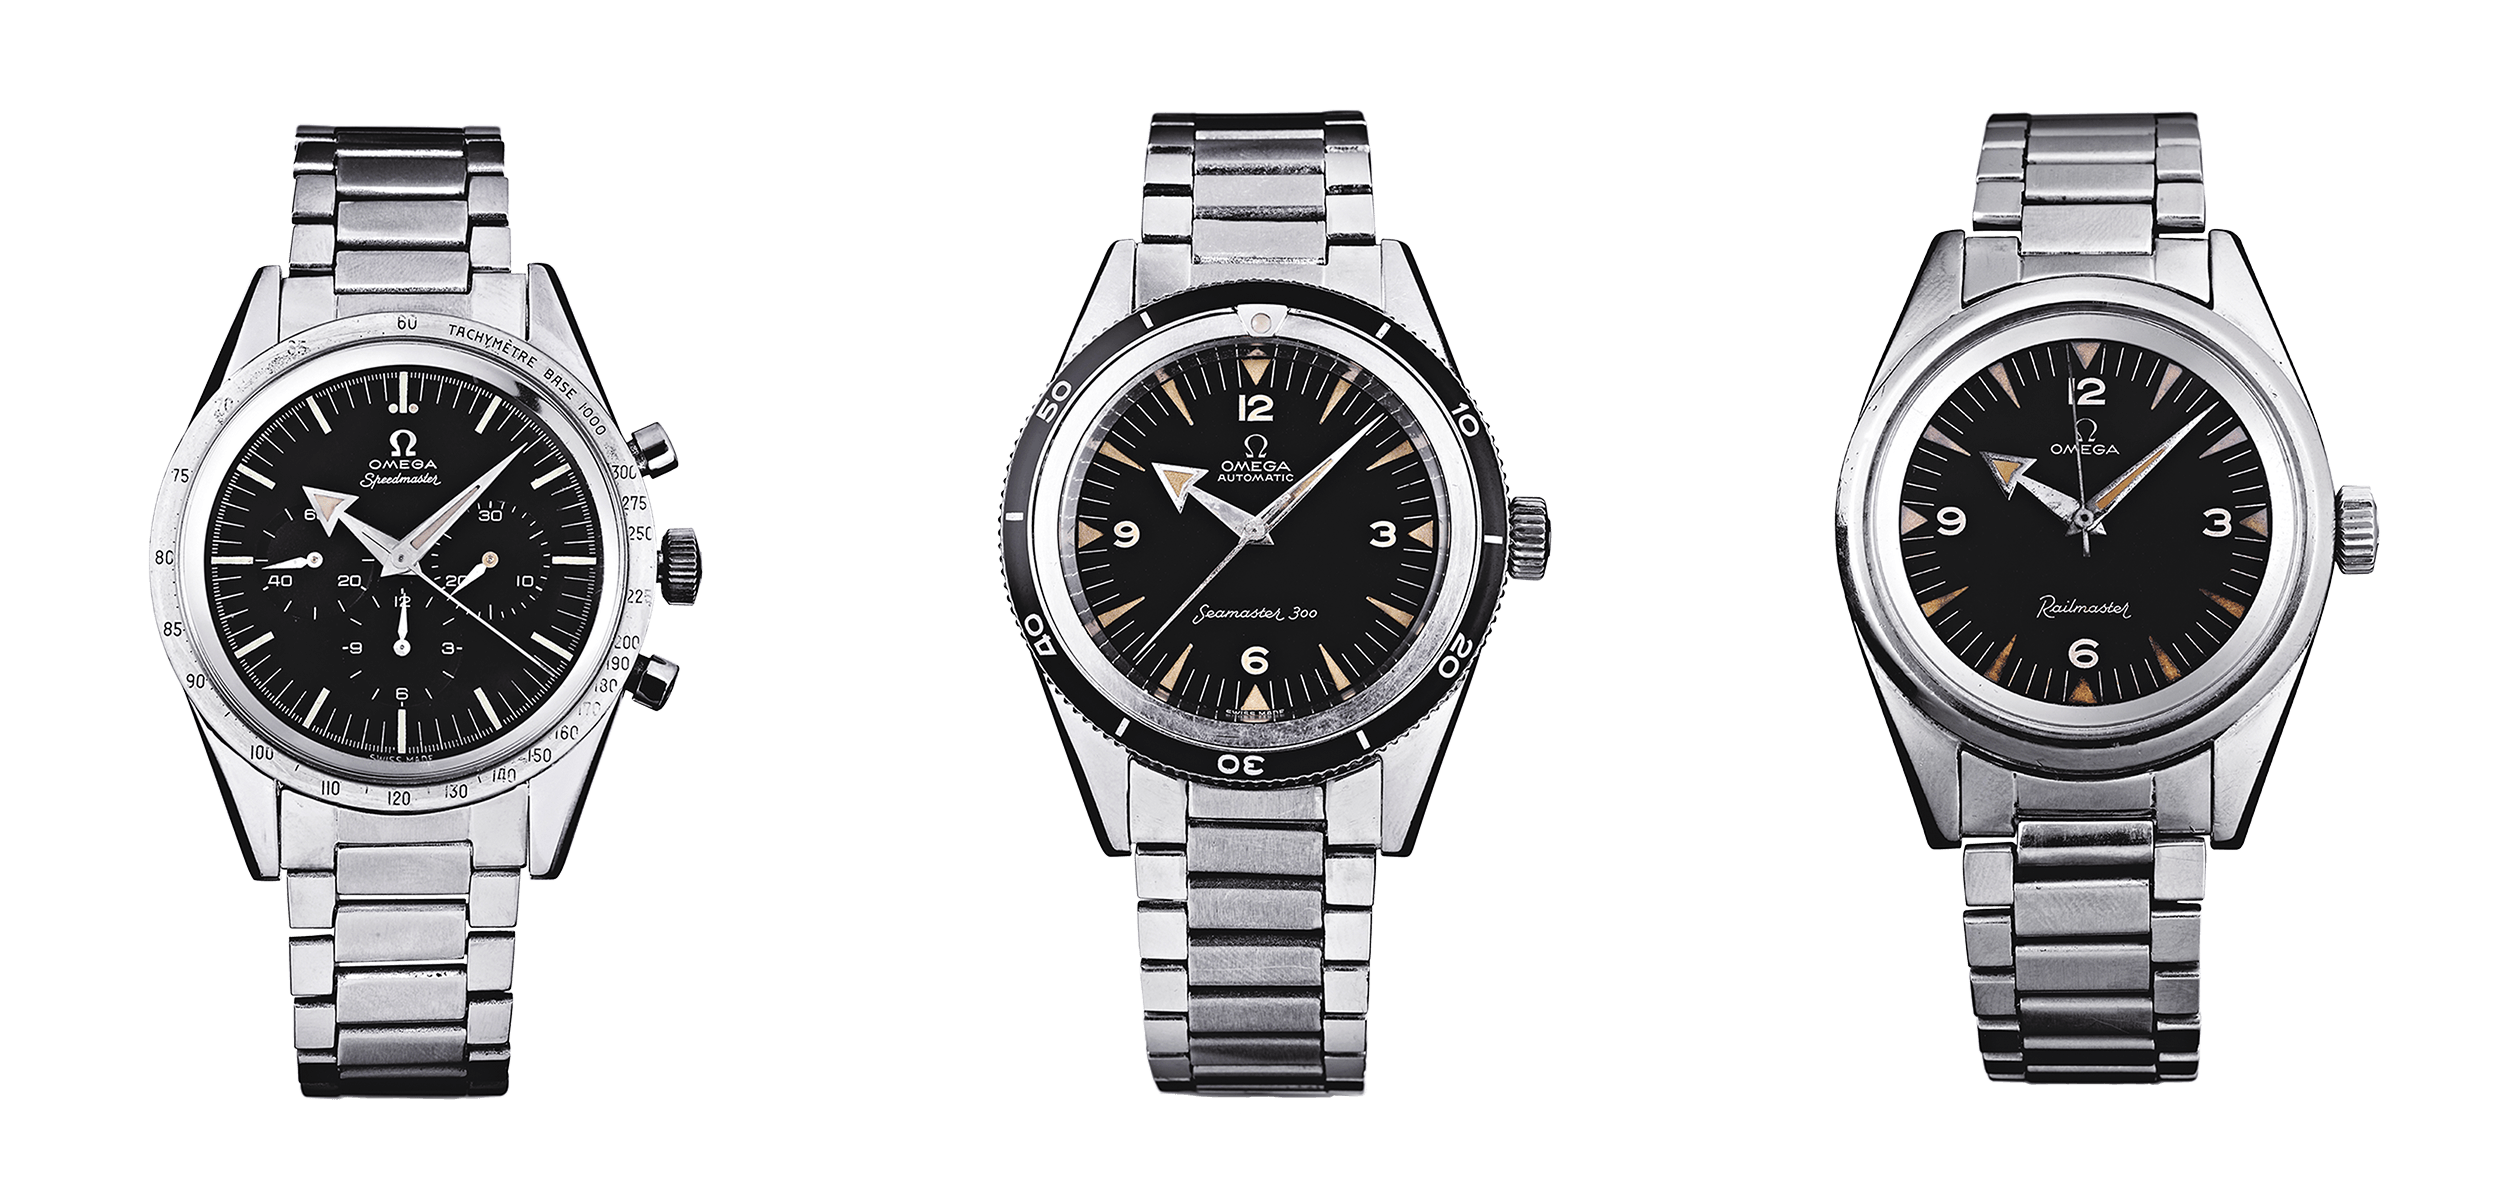 The 1957 professional watches by OMEGA: the Speedmaster, Seamaster 300 and Railmaster